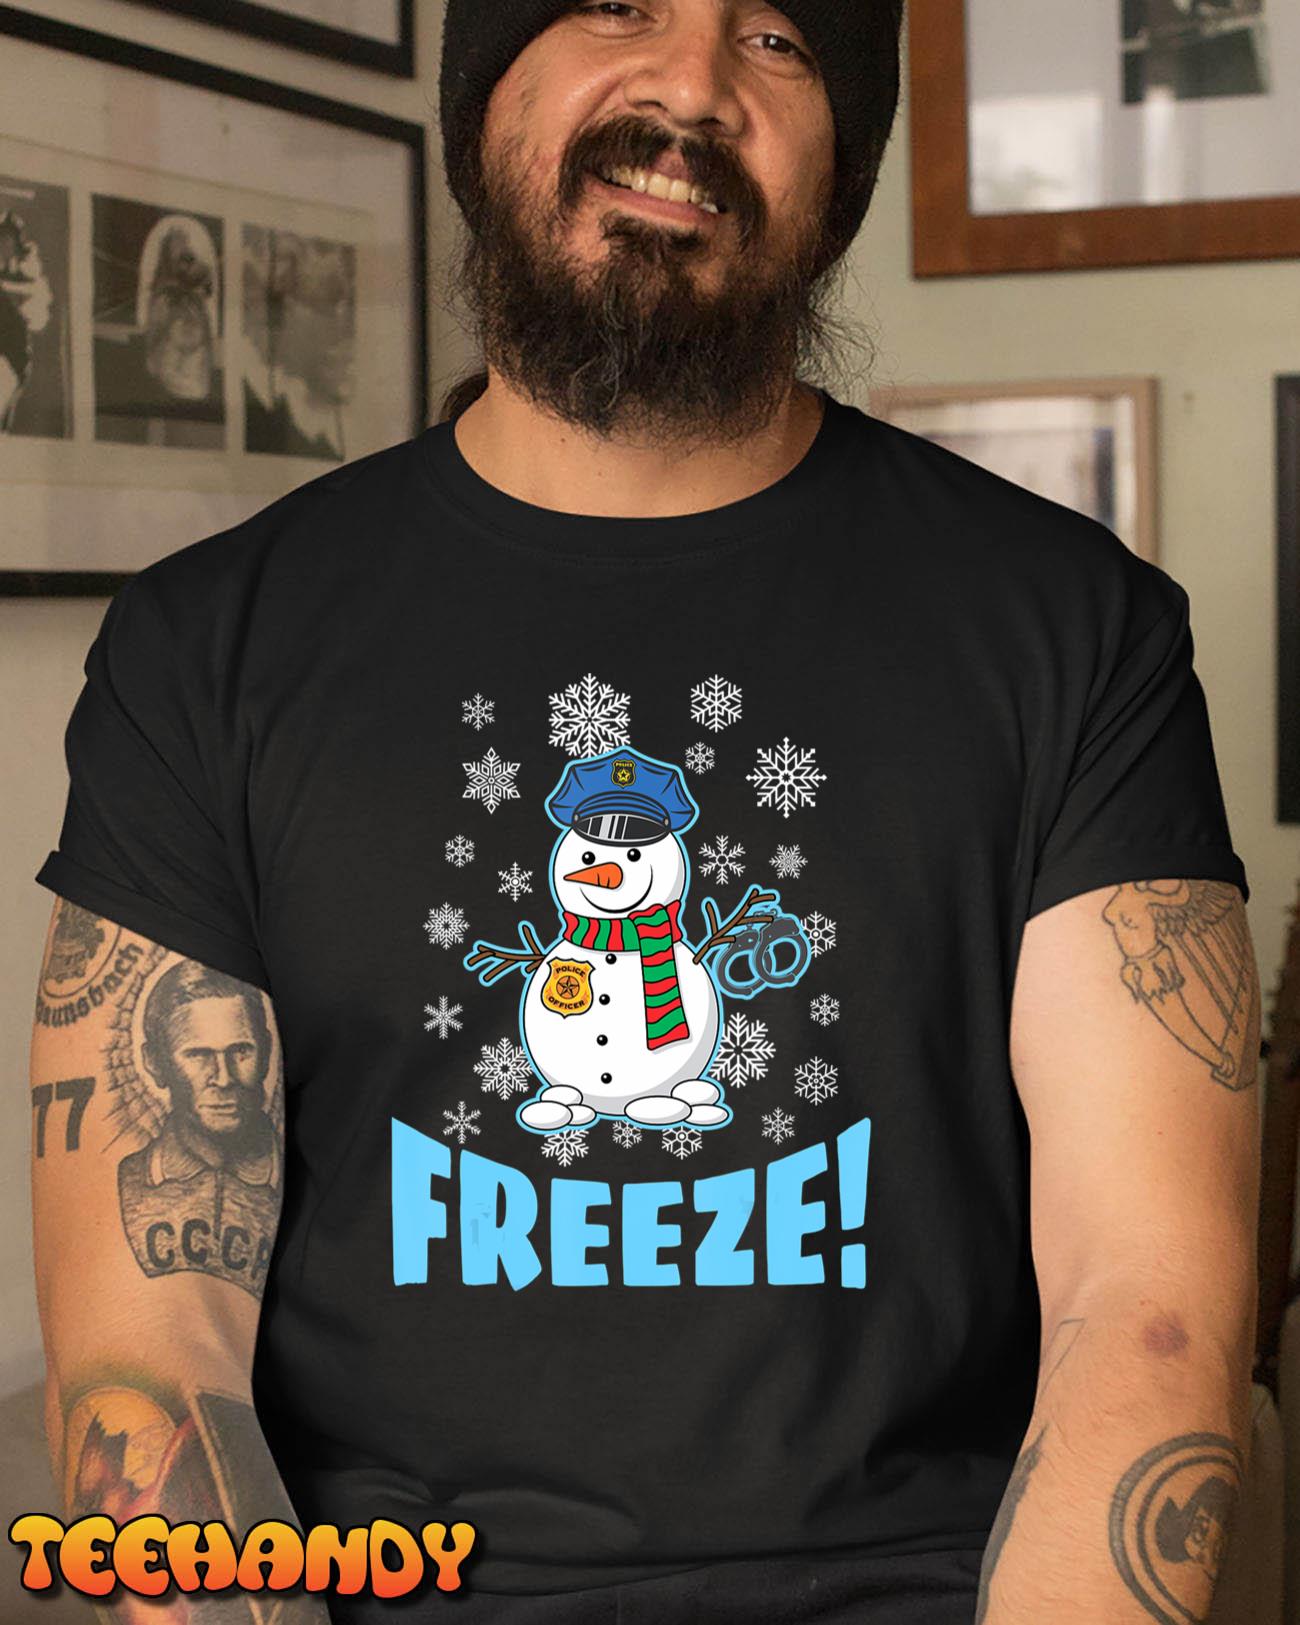 Cop Snowman, Ugly Christmas For Men Women, Funny Holiday T-Shirt